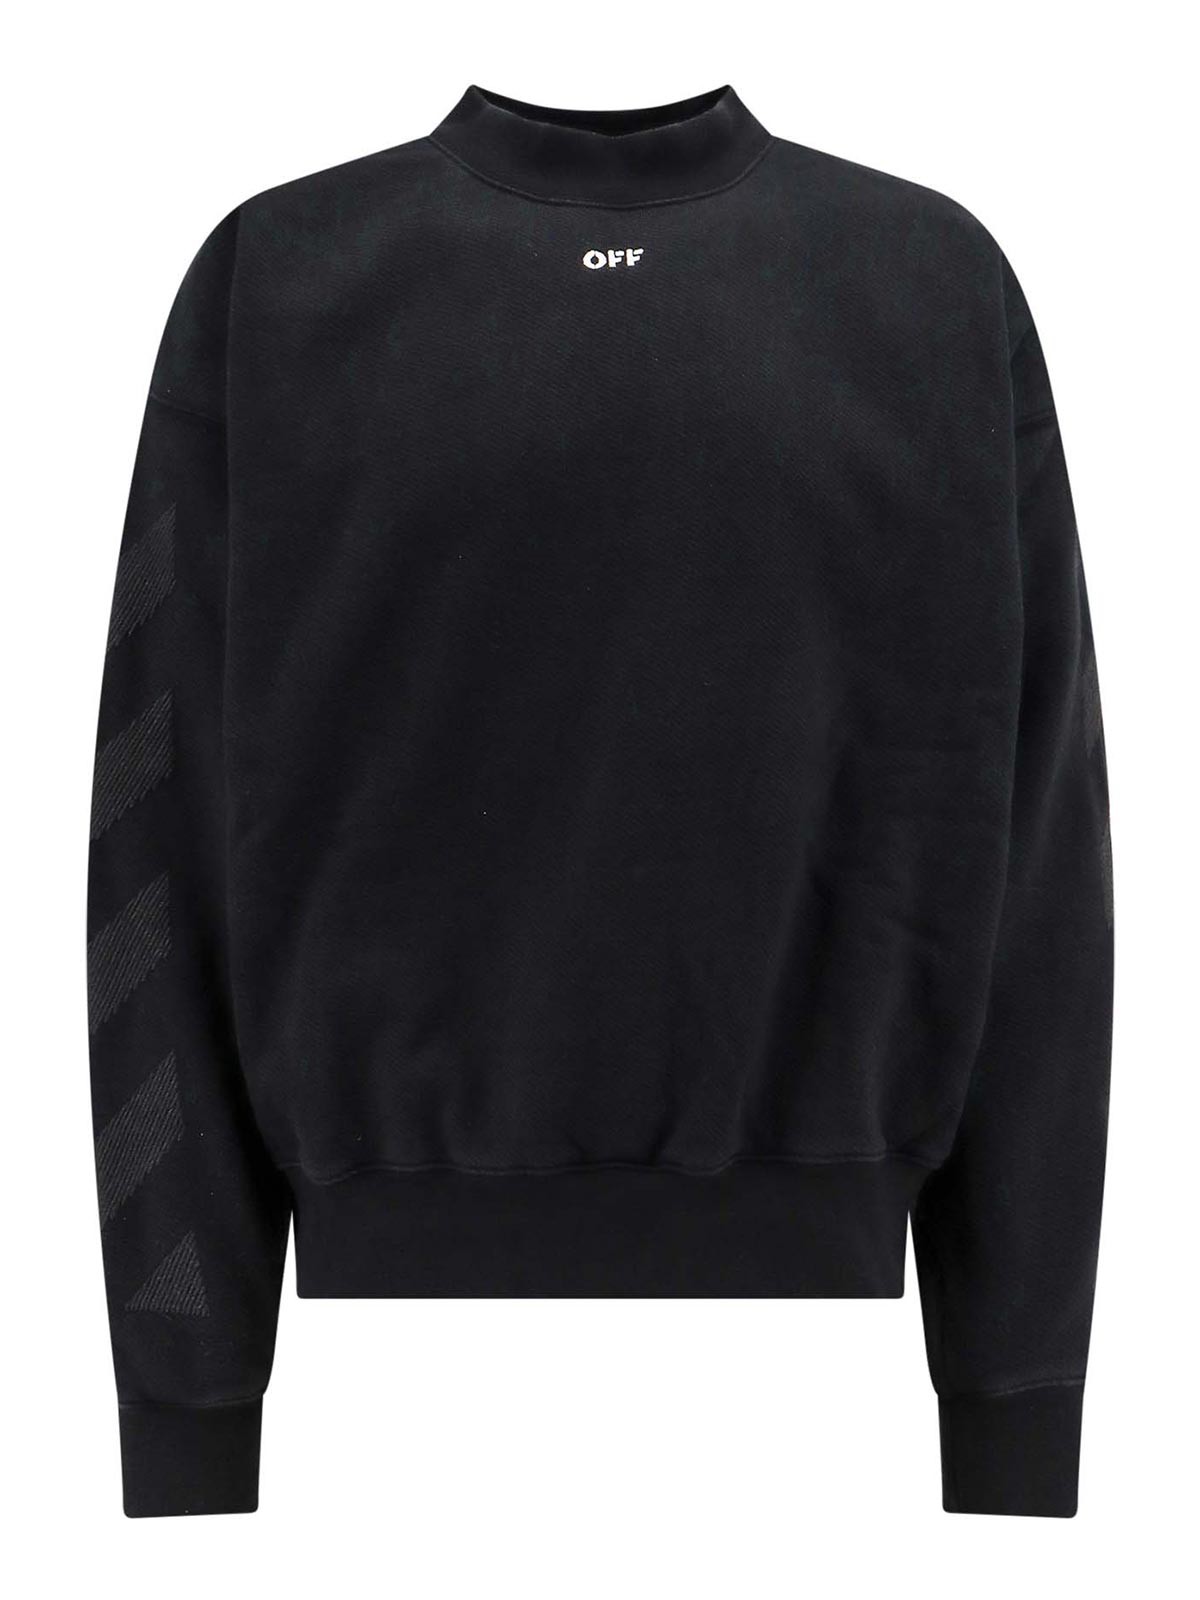 Off-white Cotton Sweatshirt With Frontal Off Logo In Negro